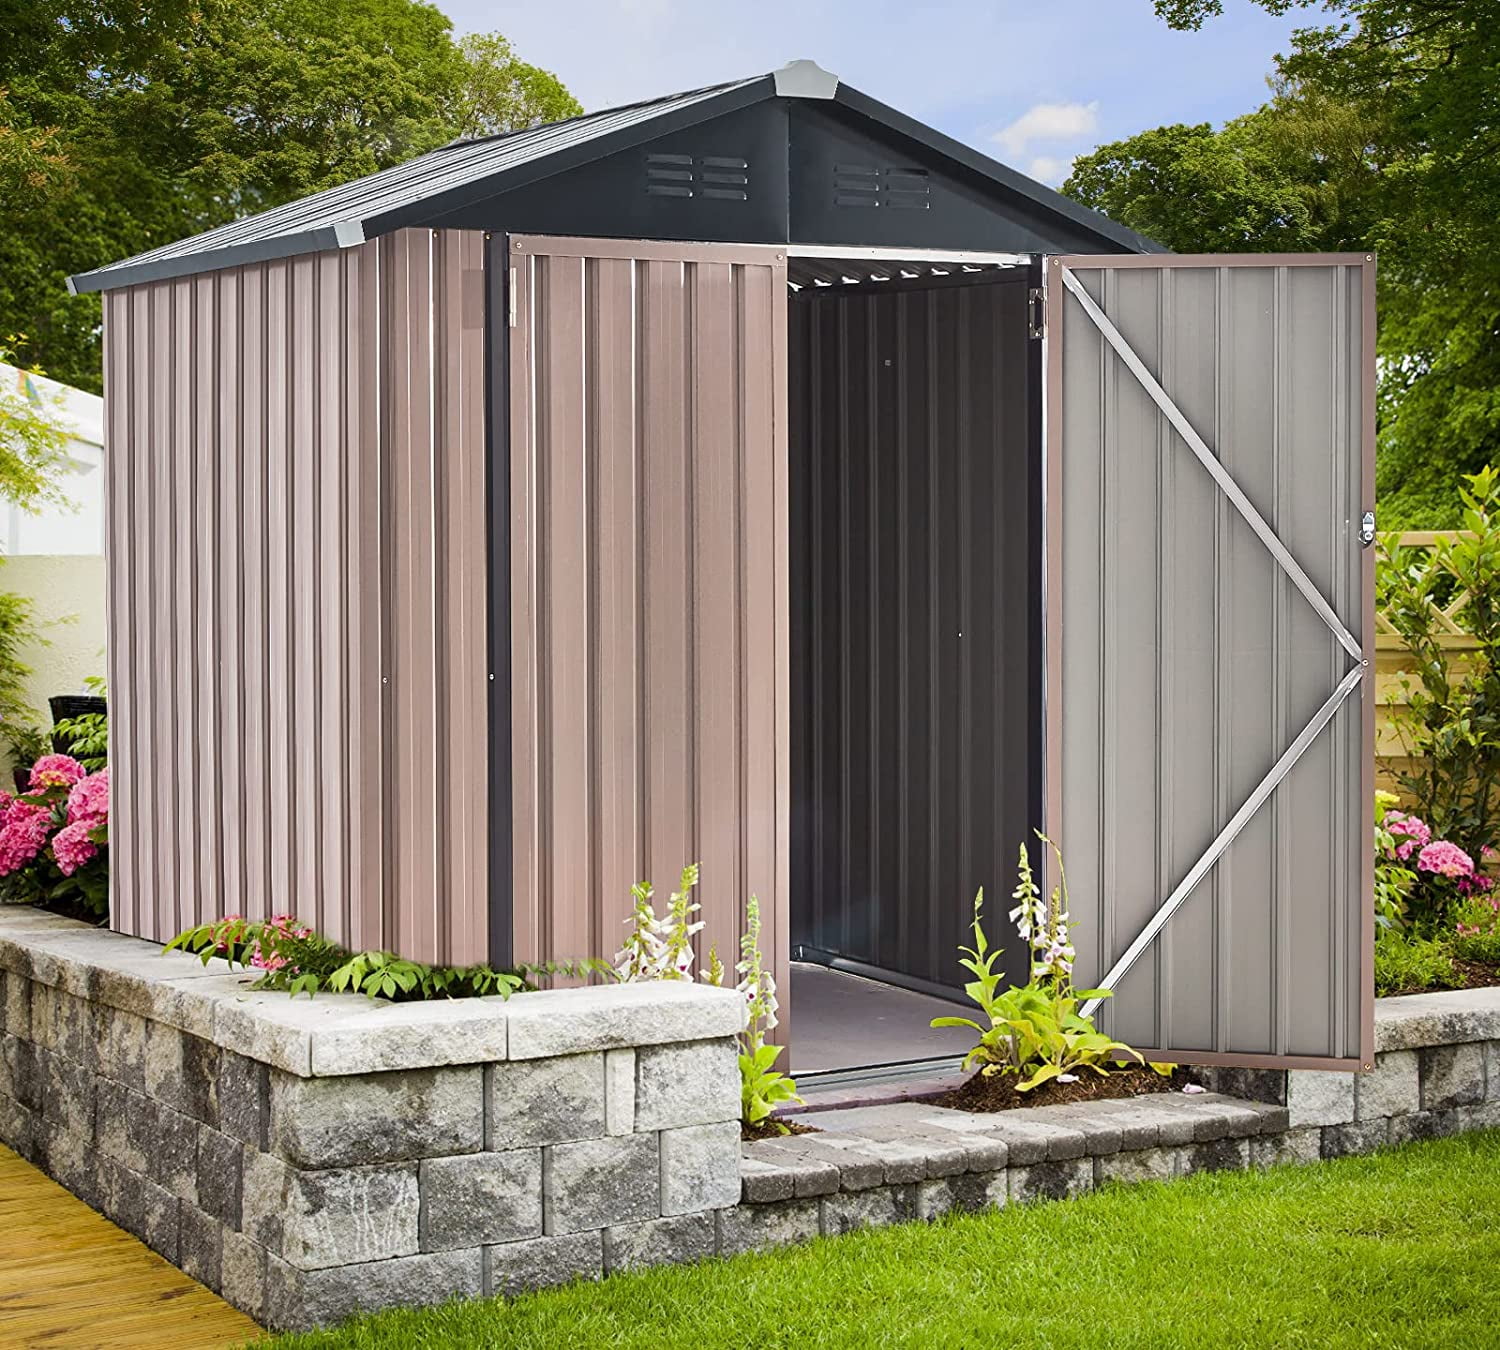 Yellow Solaura 6x4 Outdoor Vented Storage Shed Garden Backyard Tool Steel Cabin 